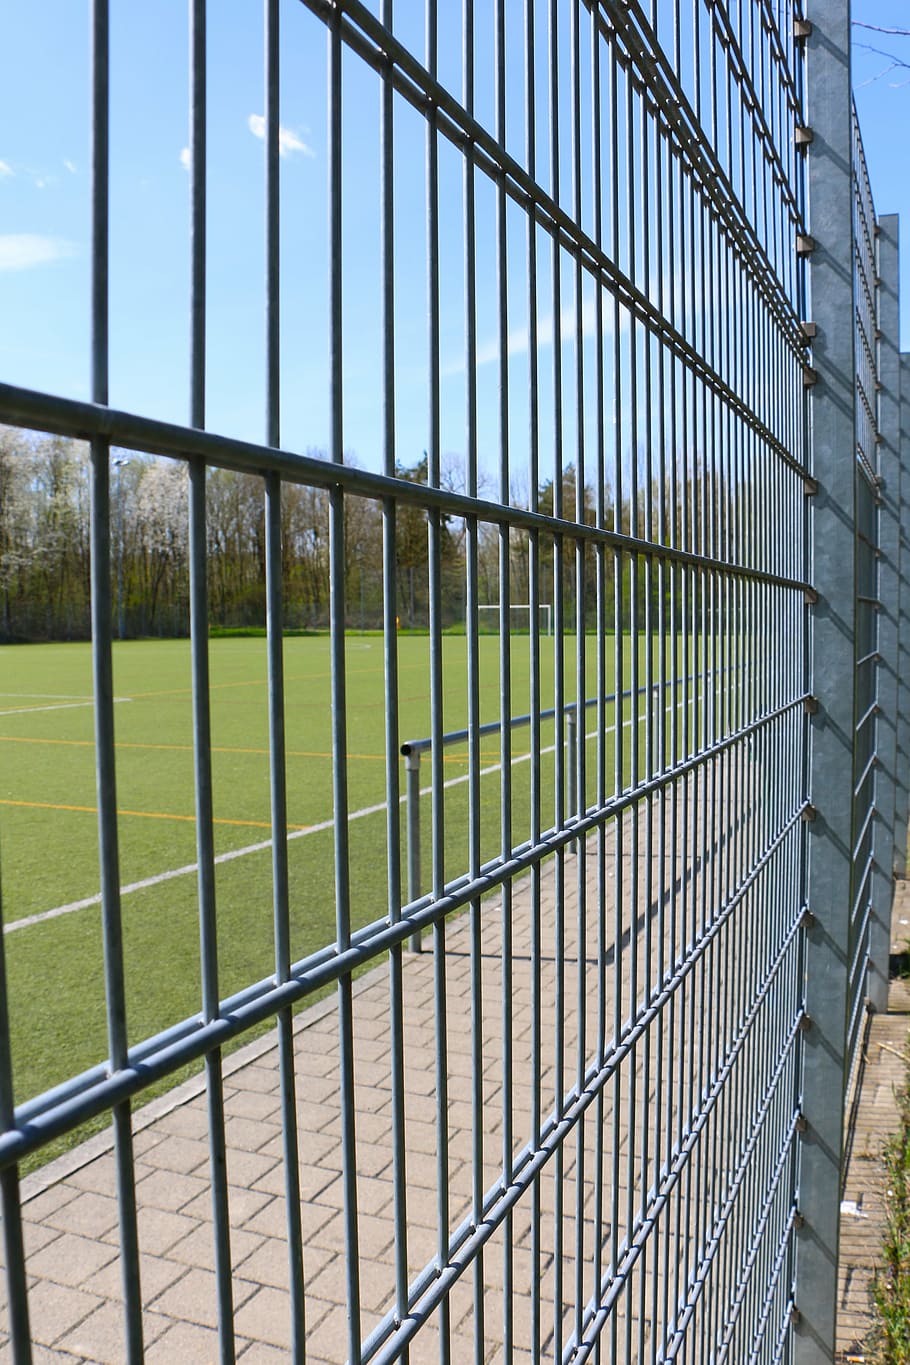 fence, fencing, sports ground, football pitch, rush, lines, grid, architecture, steel, gate